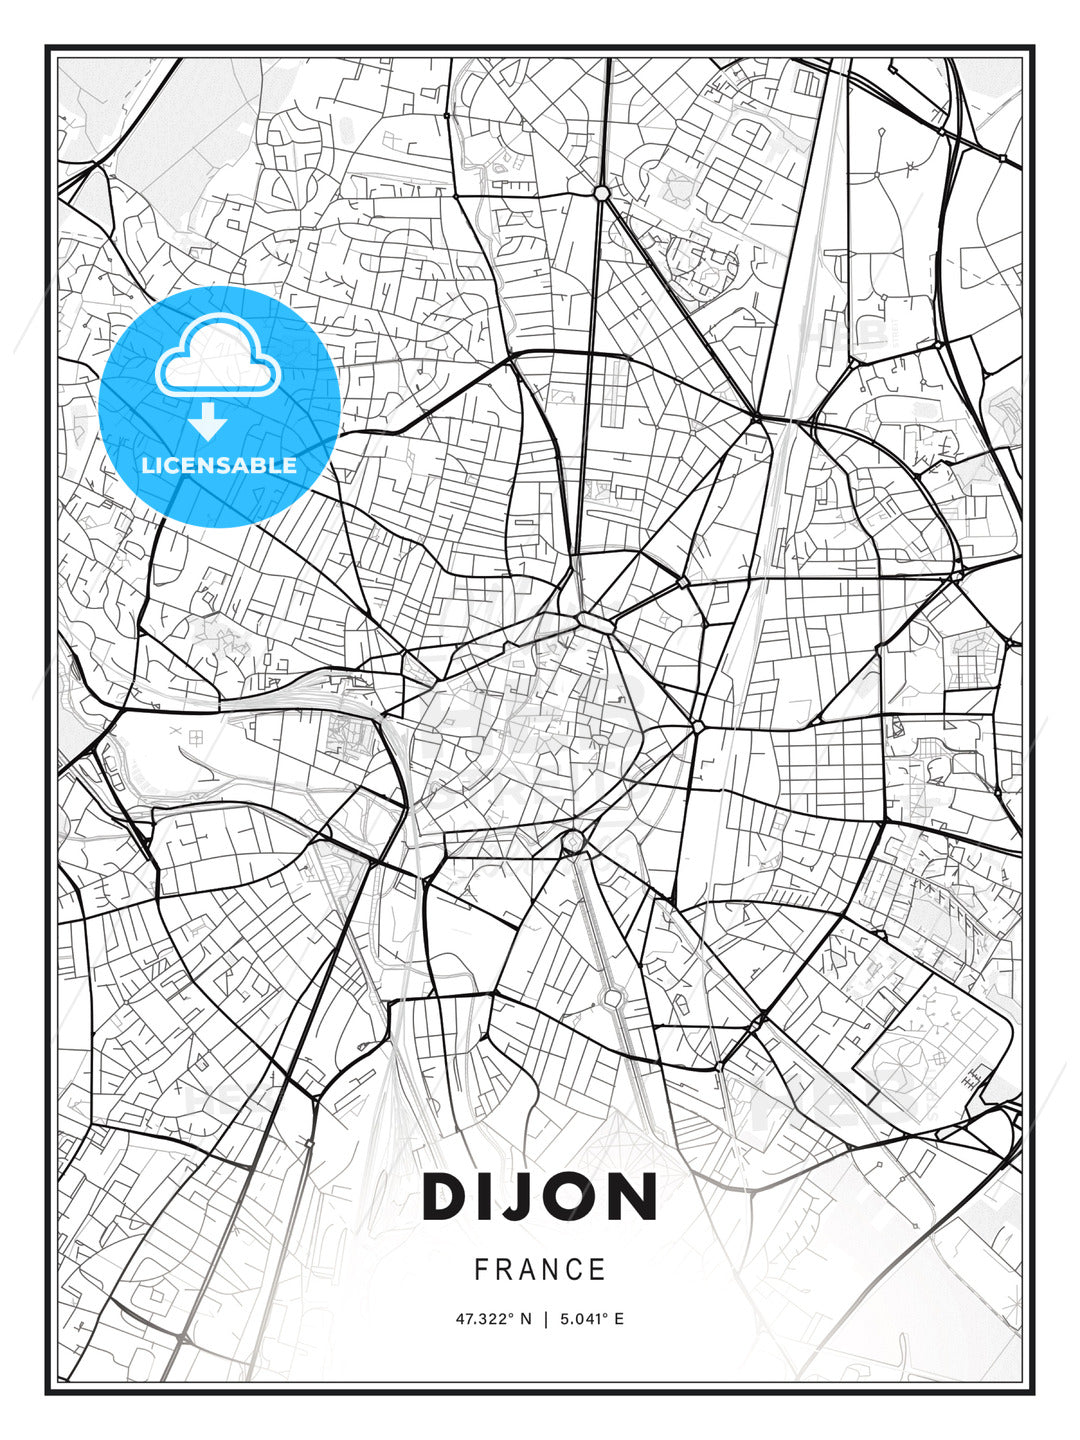 Dijon, France, Modern Print Template in Various Formats - HEBSTREITS Sketches